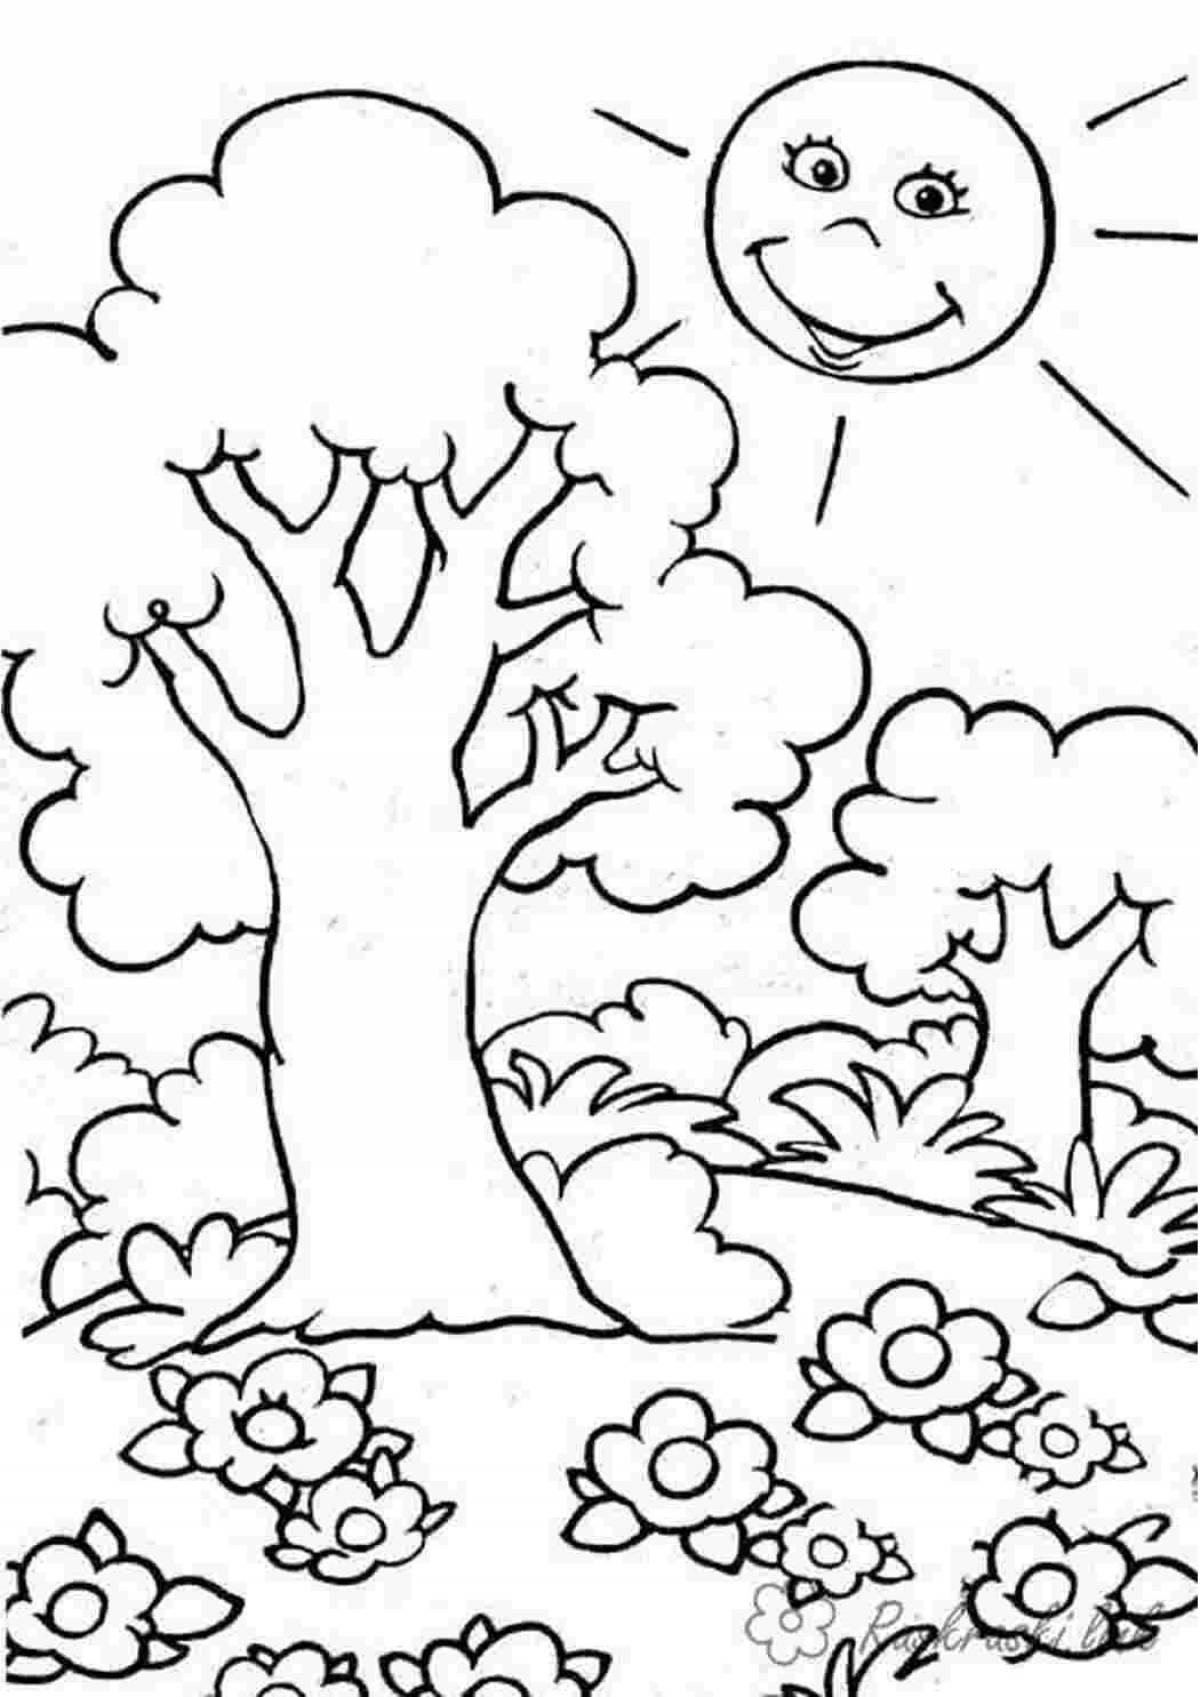 Refreshing forest coloring page